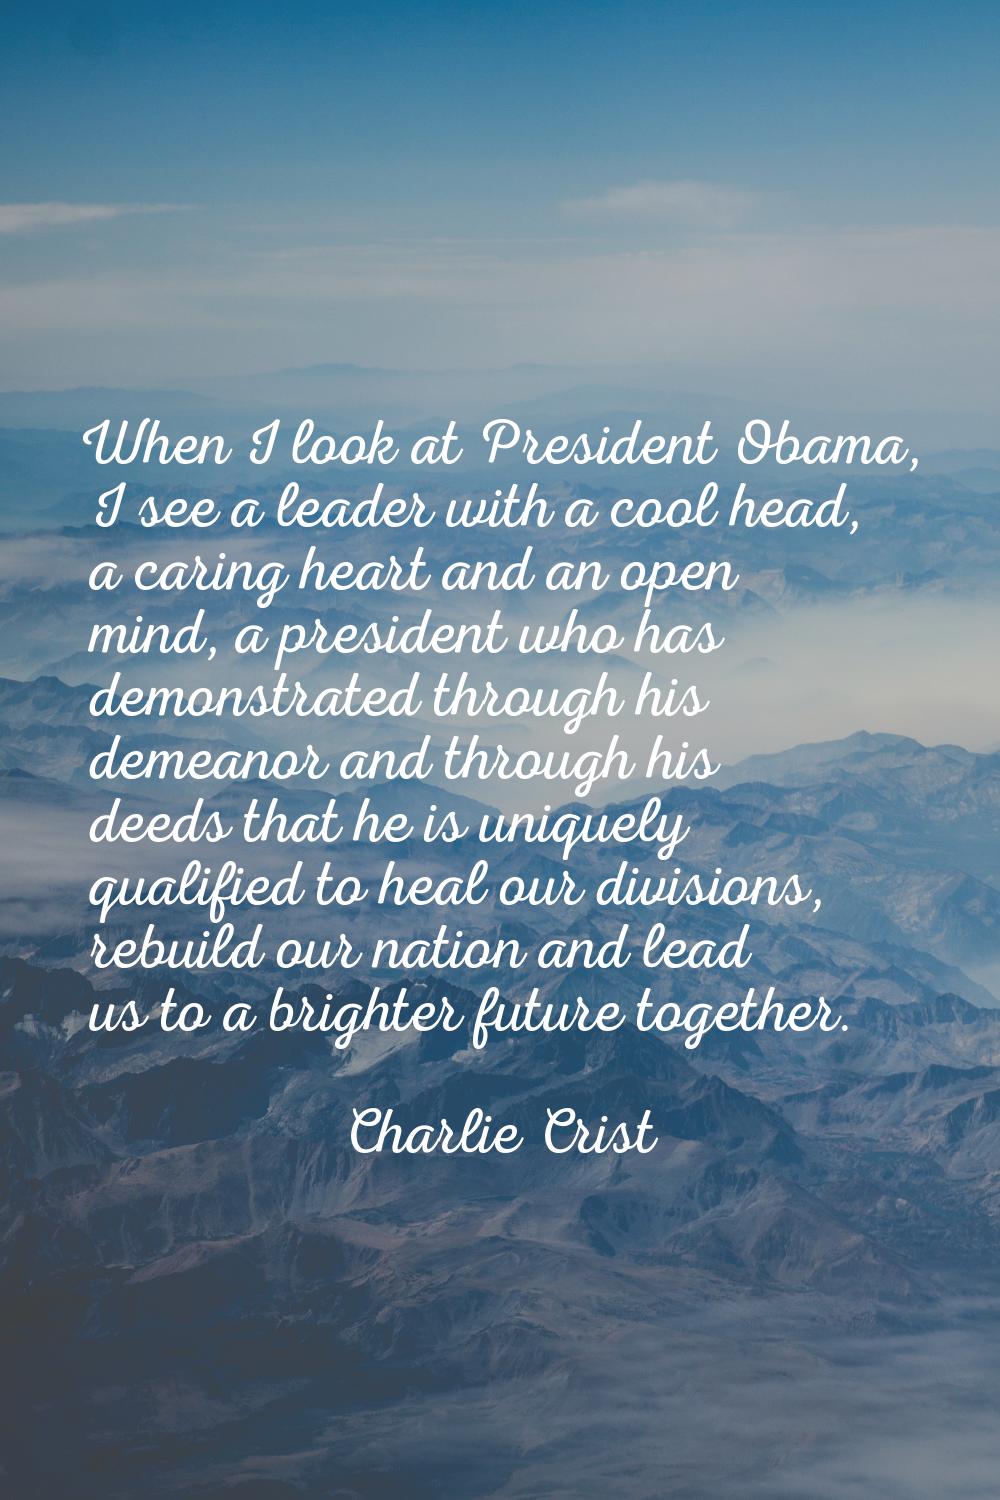 When I look at President Obama, I see a leader with a cool head, a caring heart and an open mind, a